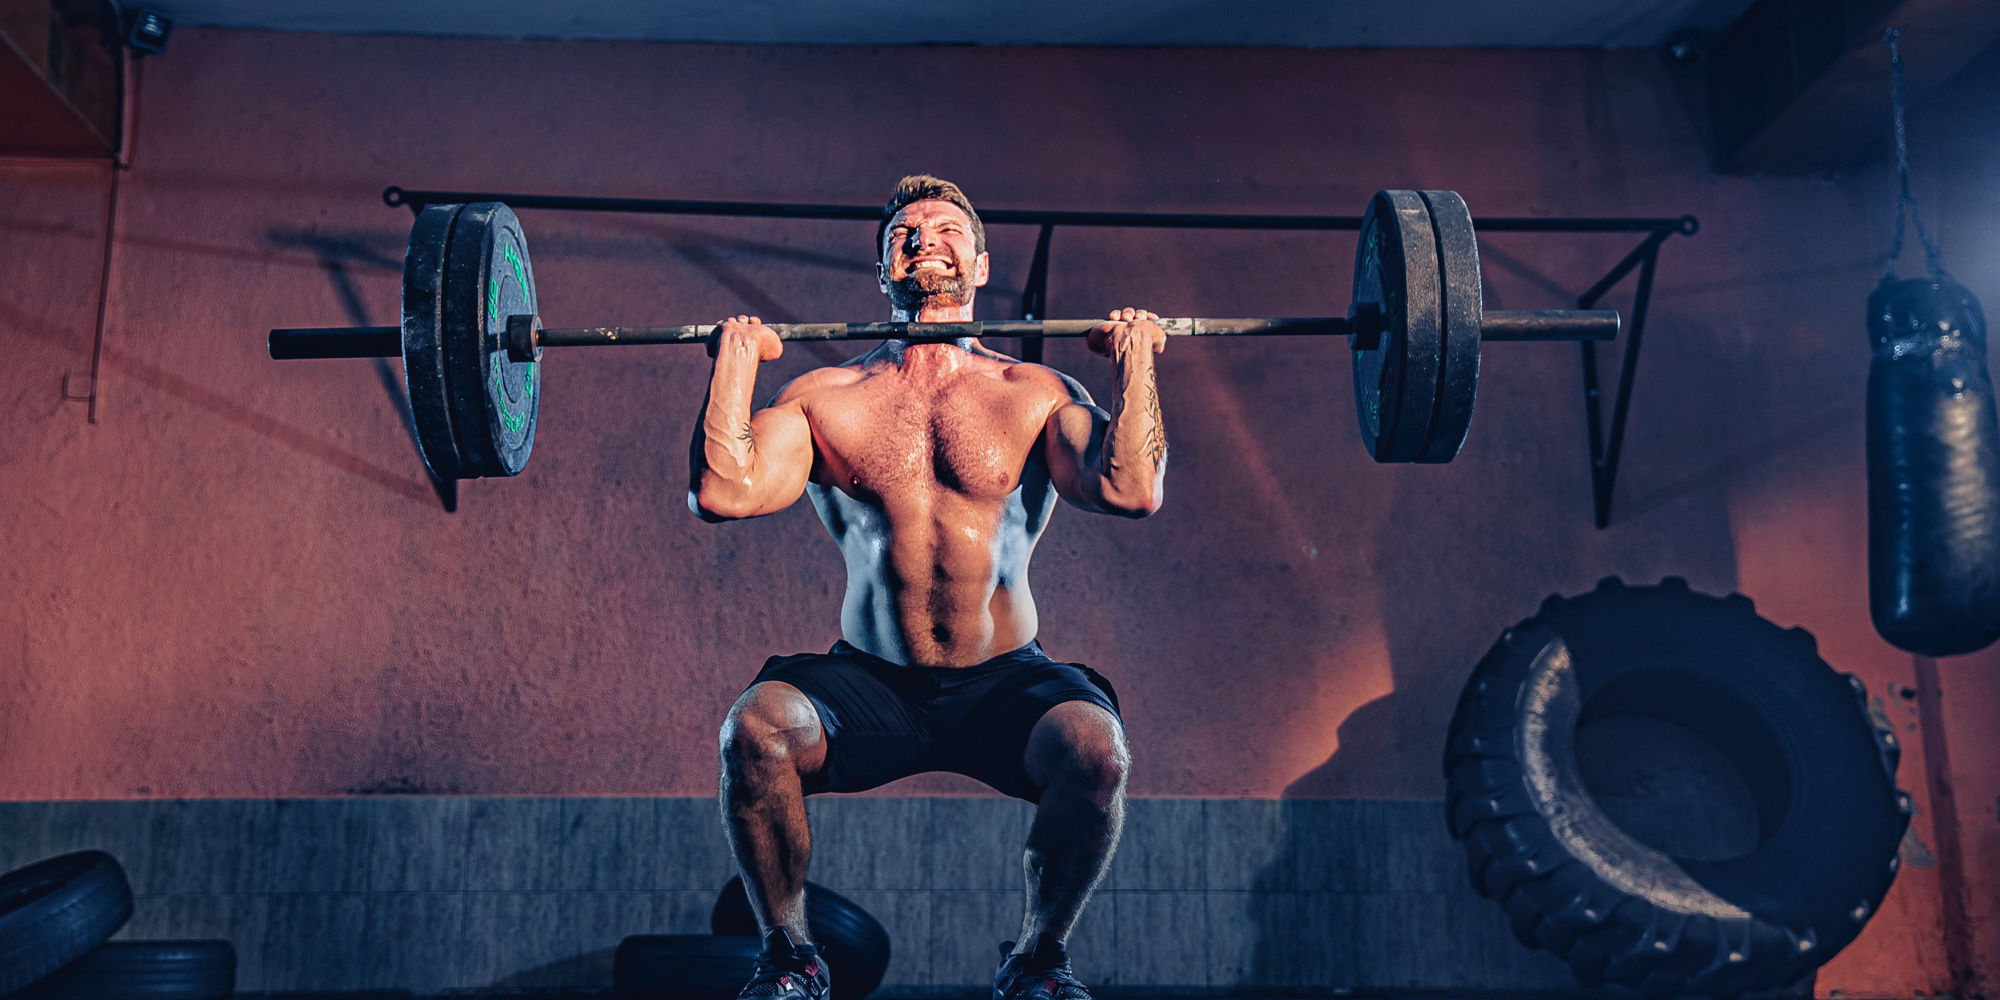 The Best Way to Quickly Build Muscle